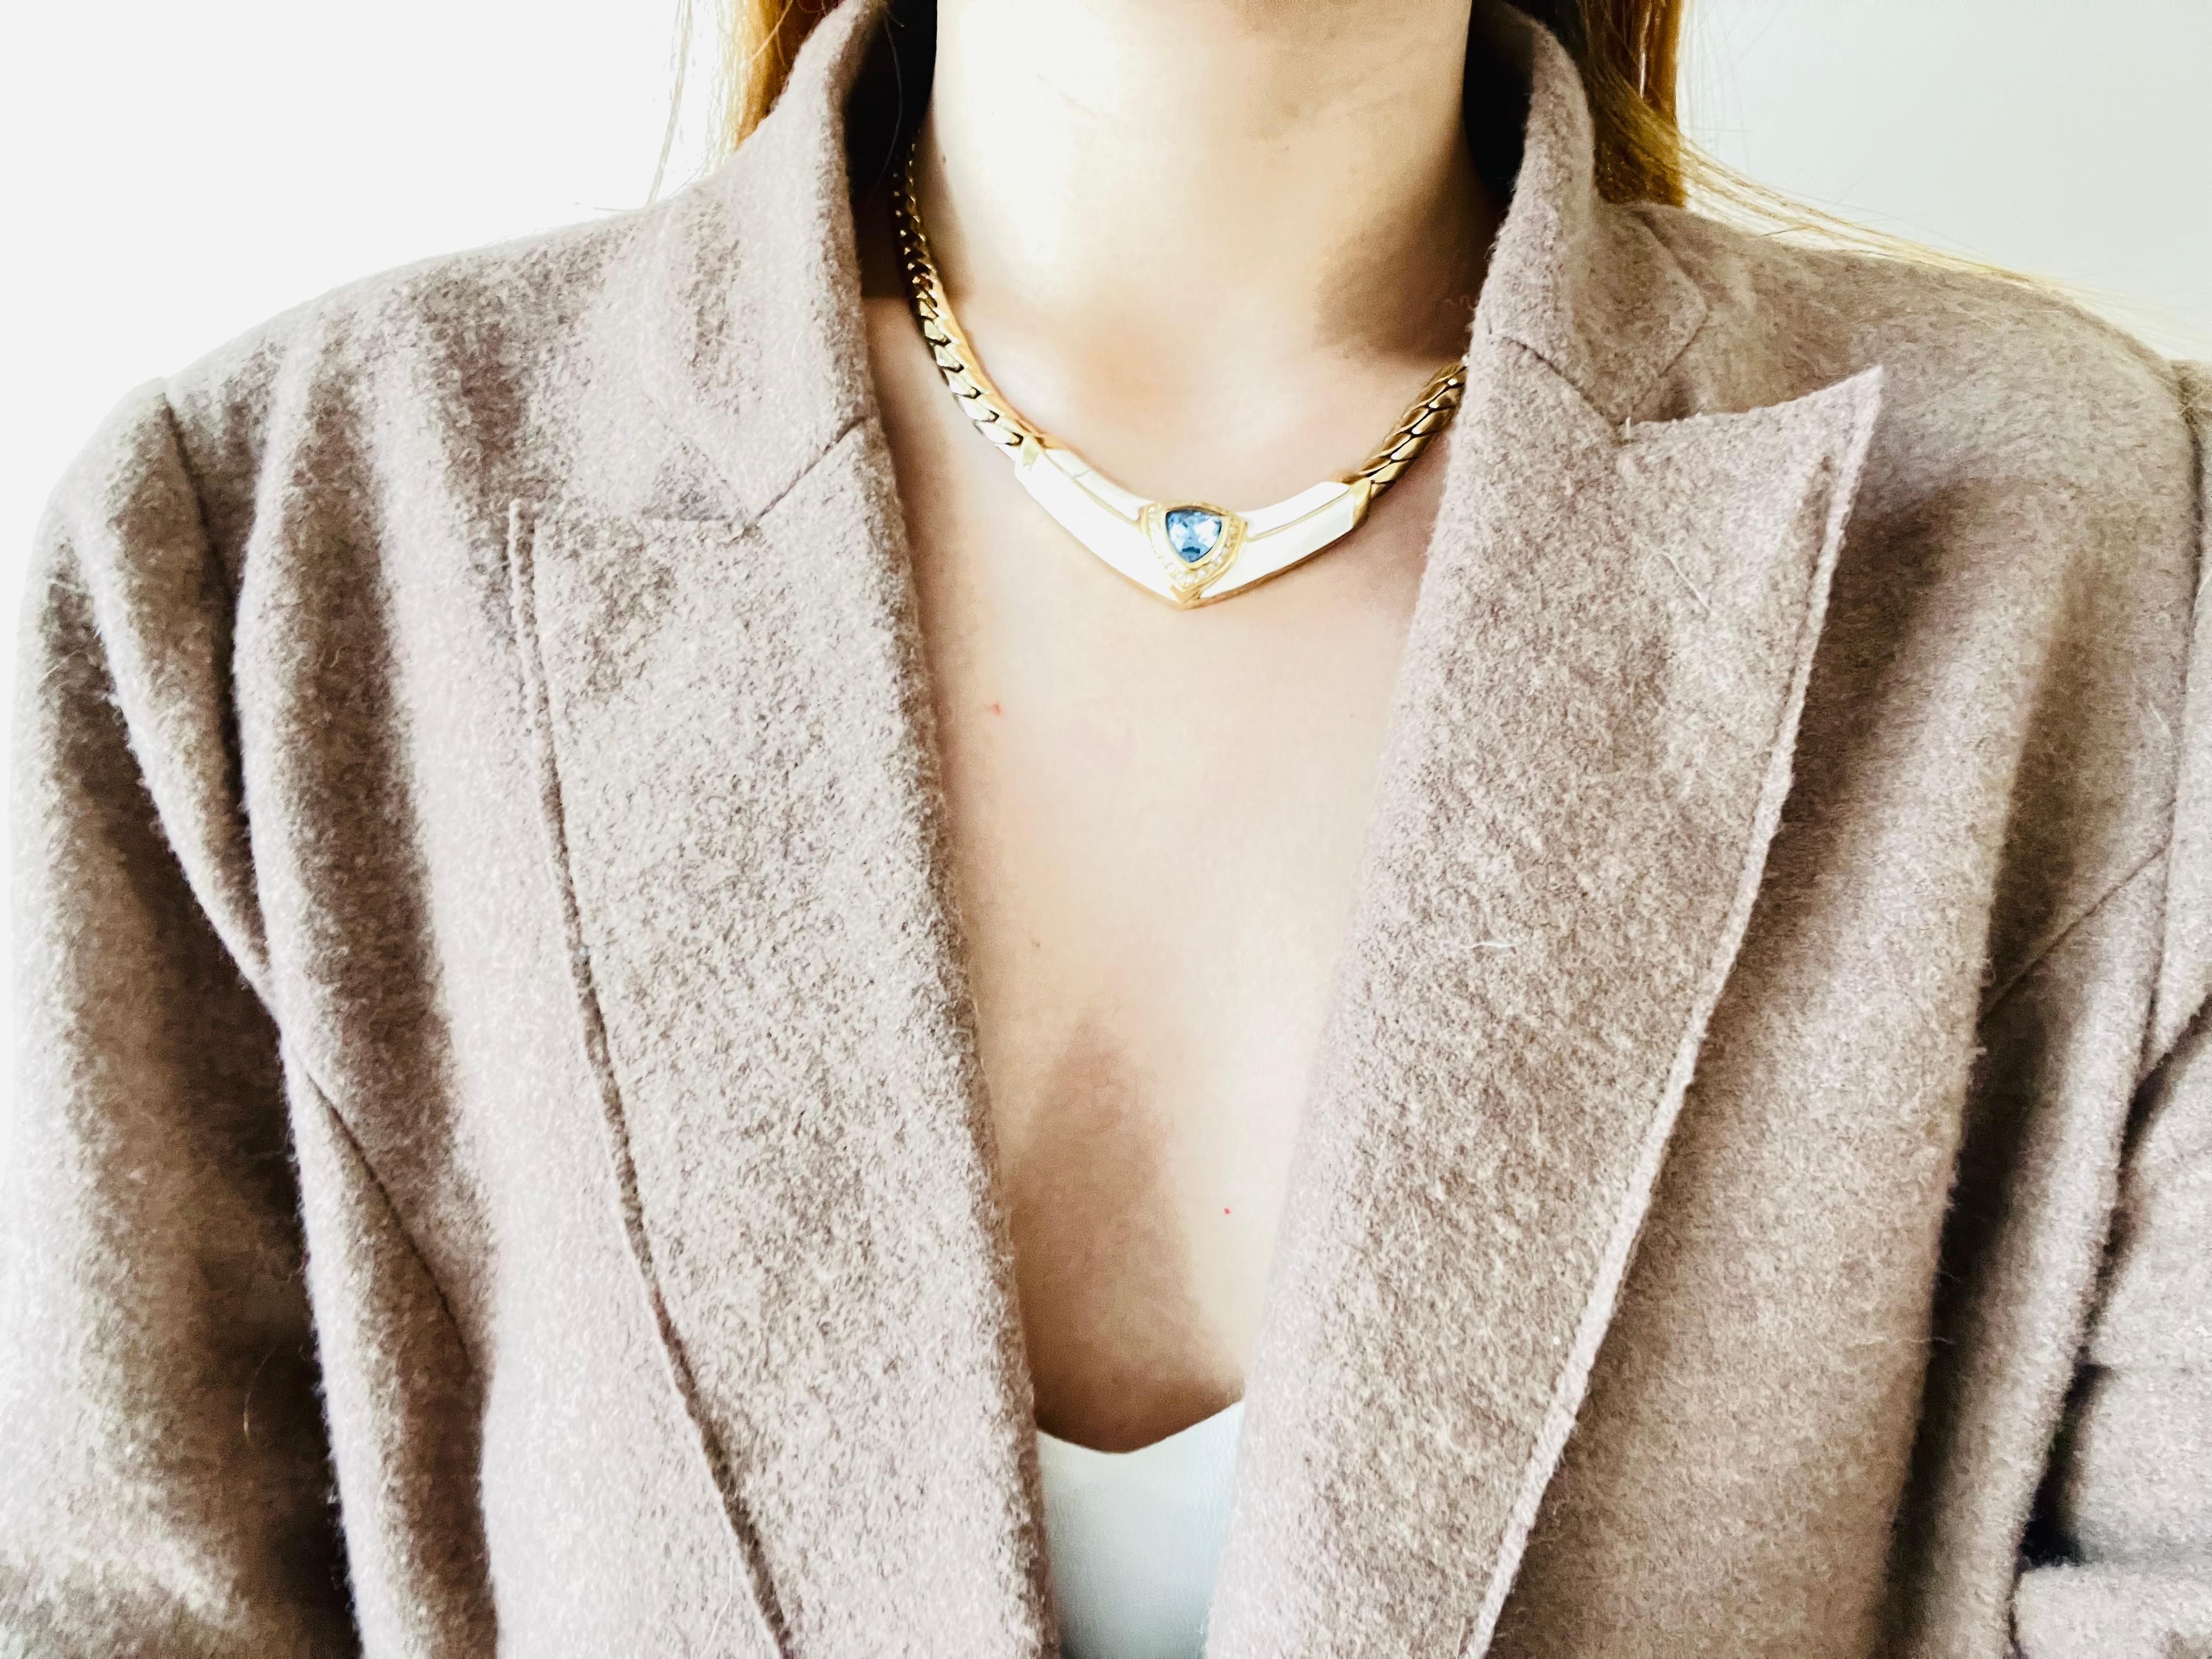 Christian Dior Vintage 1980s Aqua Blue Triangle Crystals Cream Gold Necklace In Good Condition For Sale In Wokingham, England